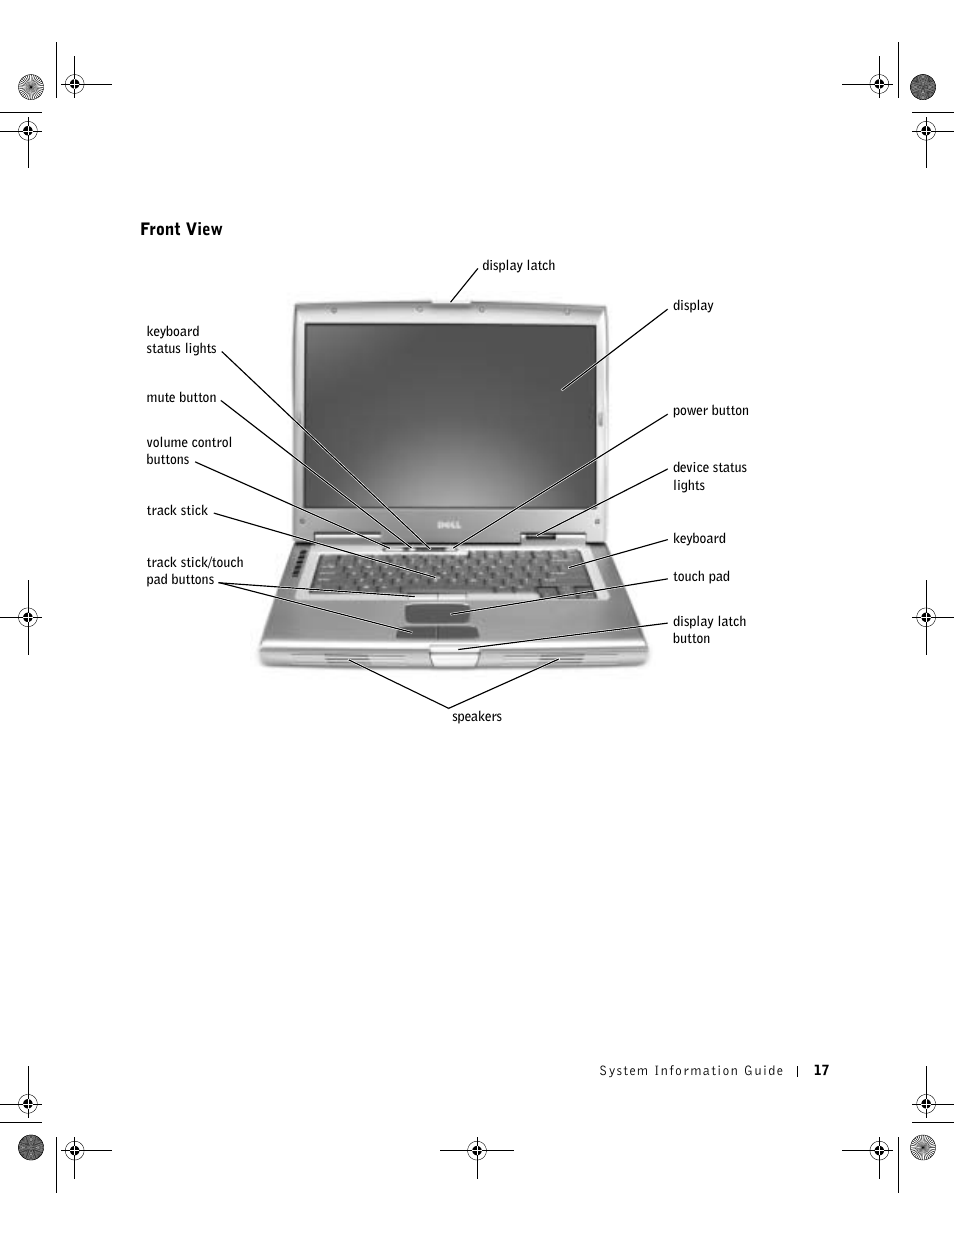 Front view | Dell Precision M60 User Manual | Page 19 / 144